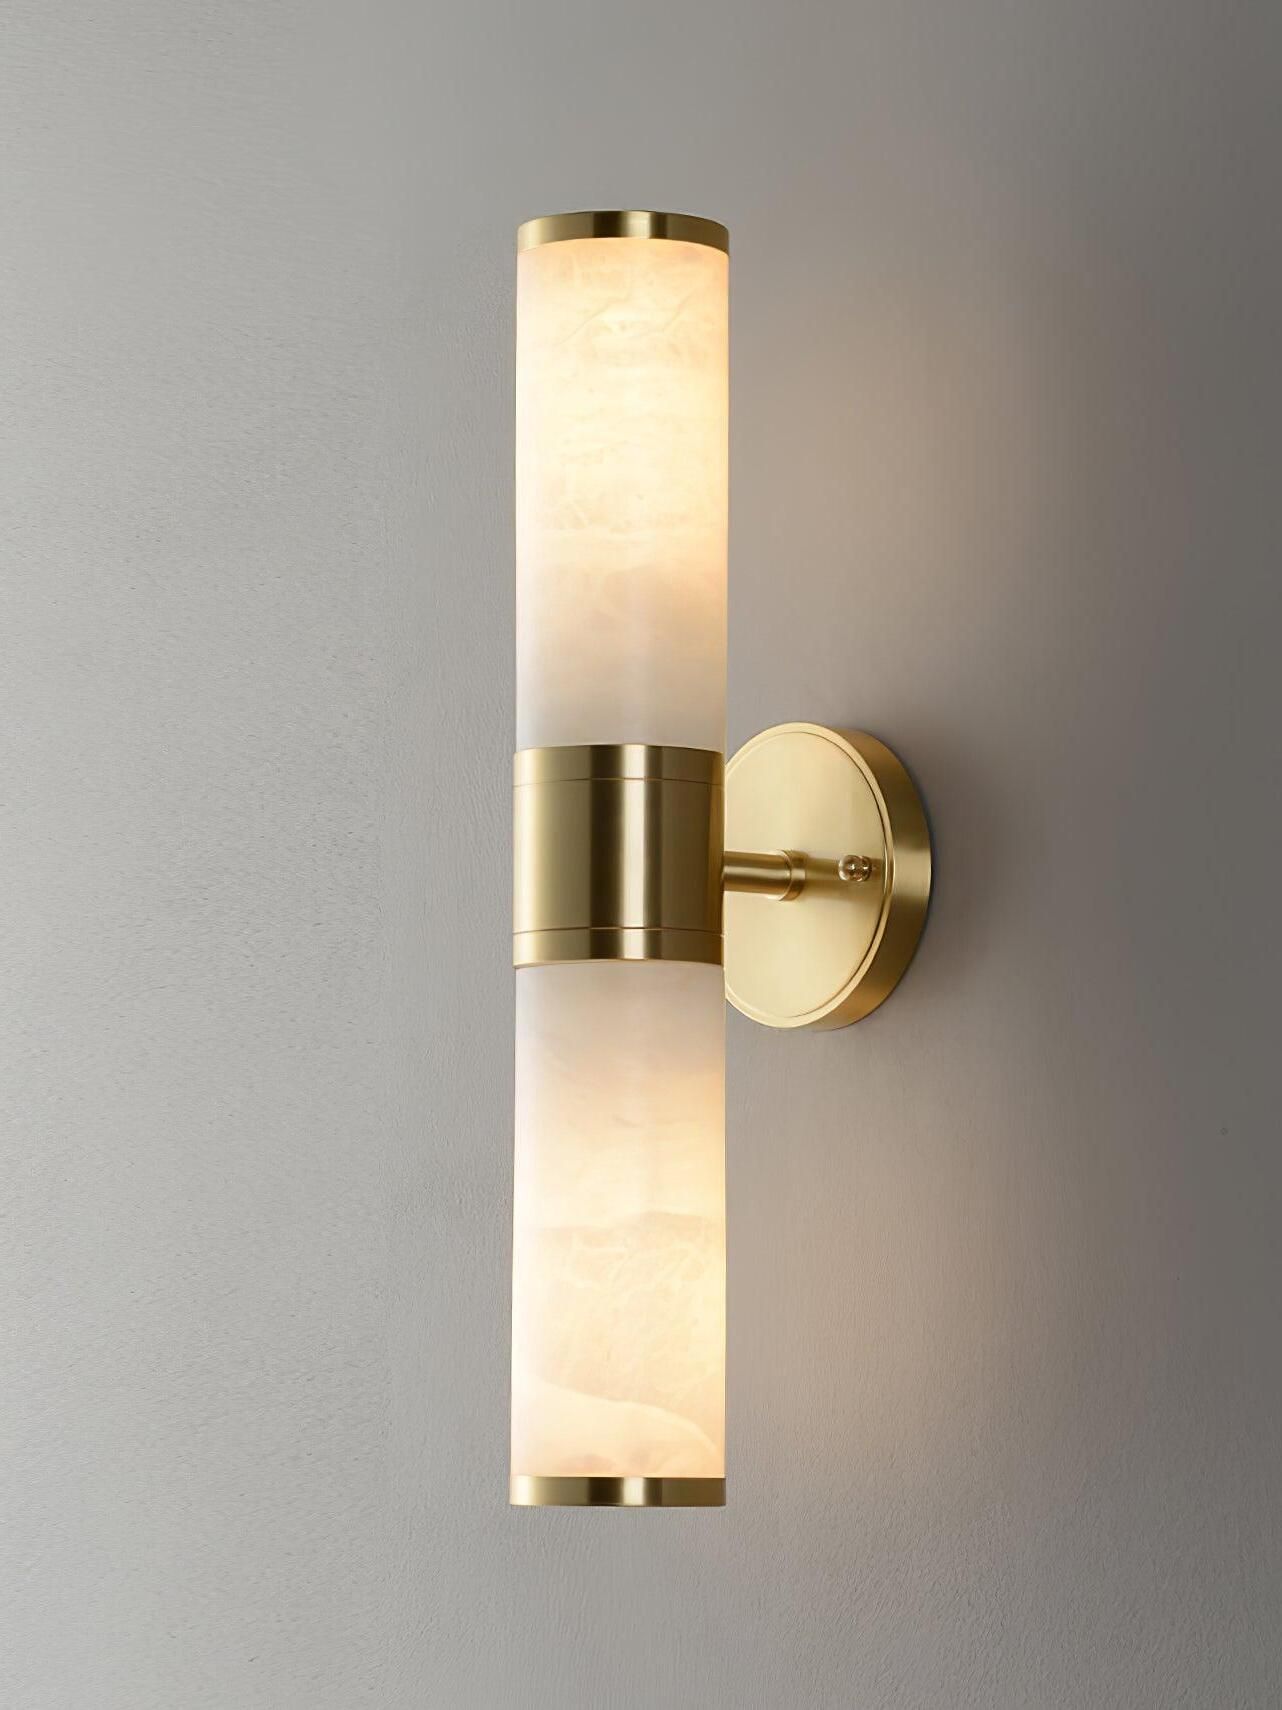 Alabaster Wall Lamp Elegant and Sophisticated Wall Lighting Option for Any Room